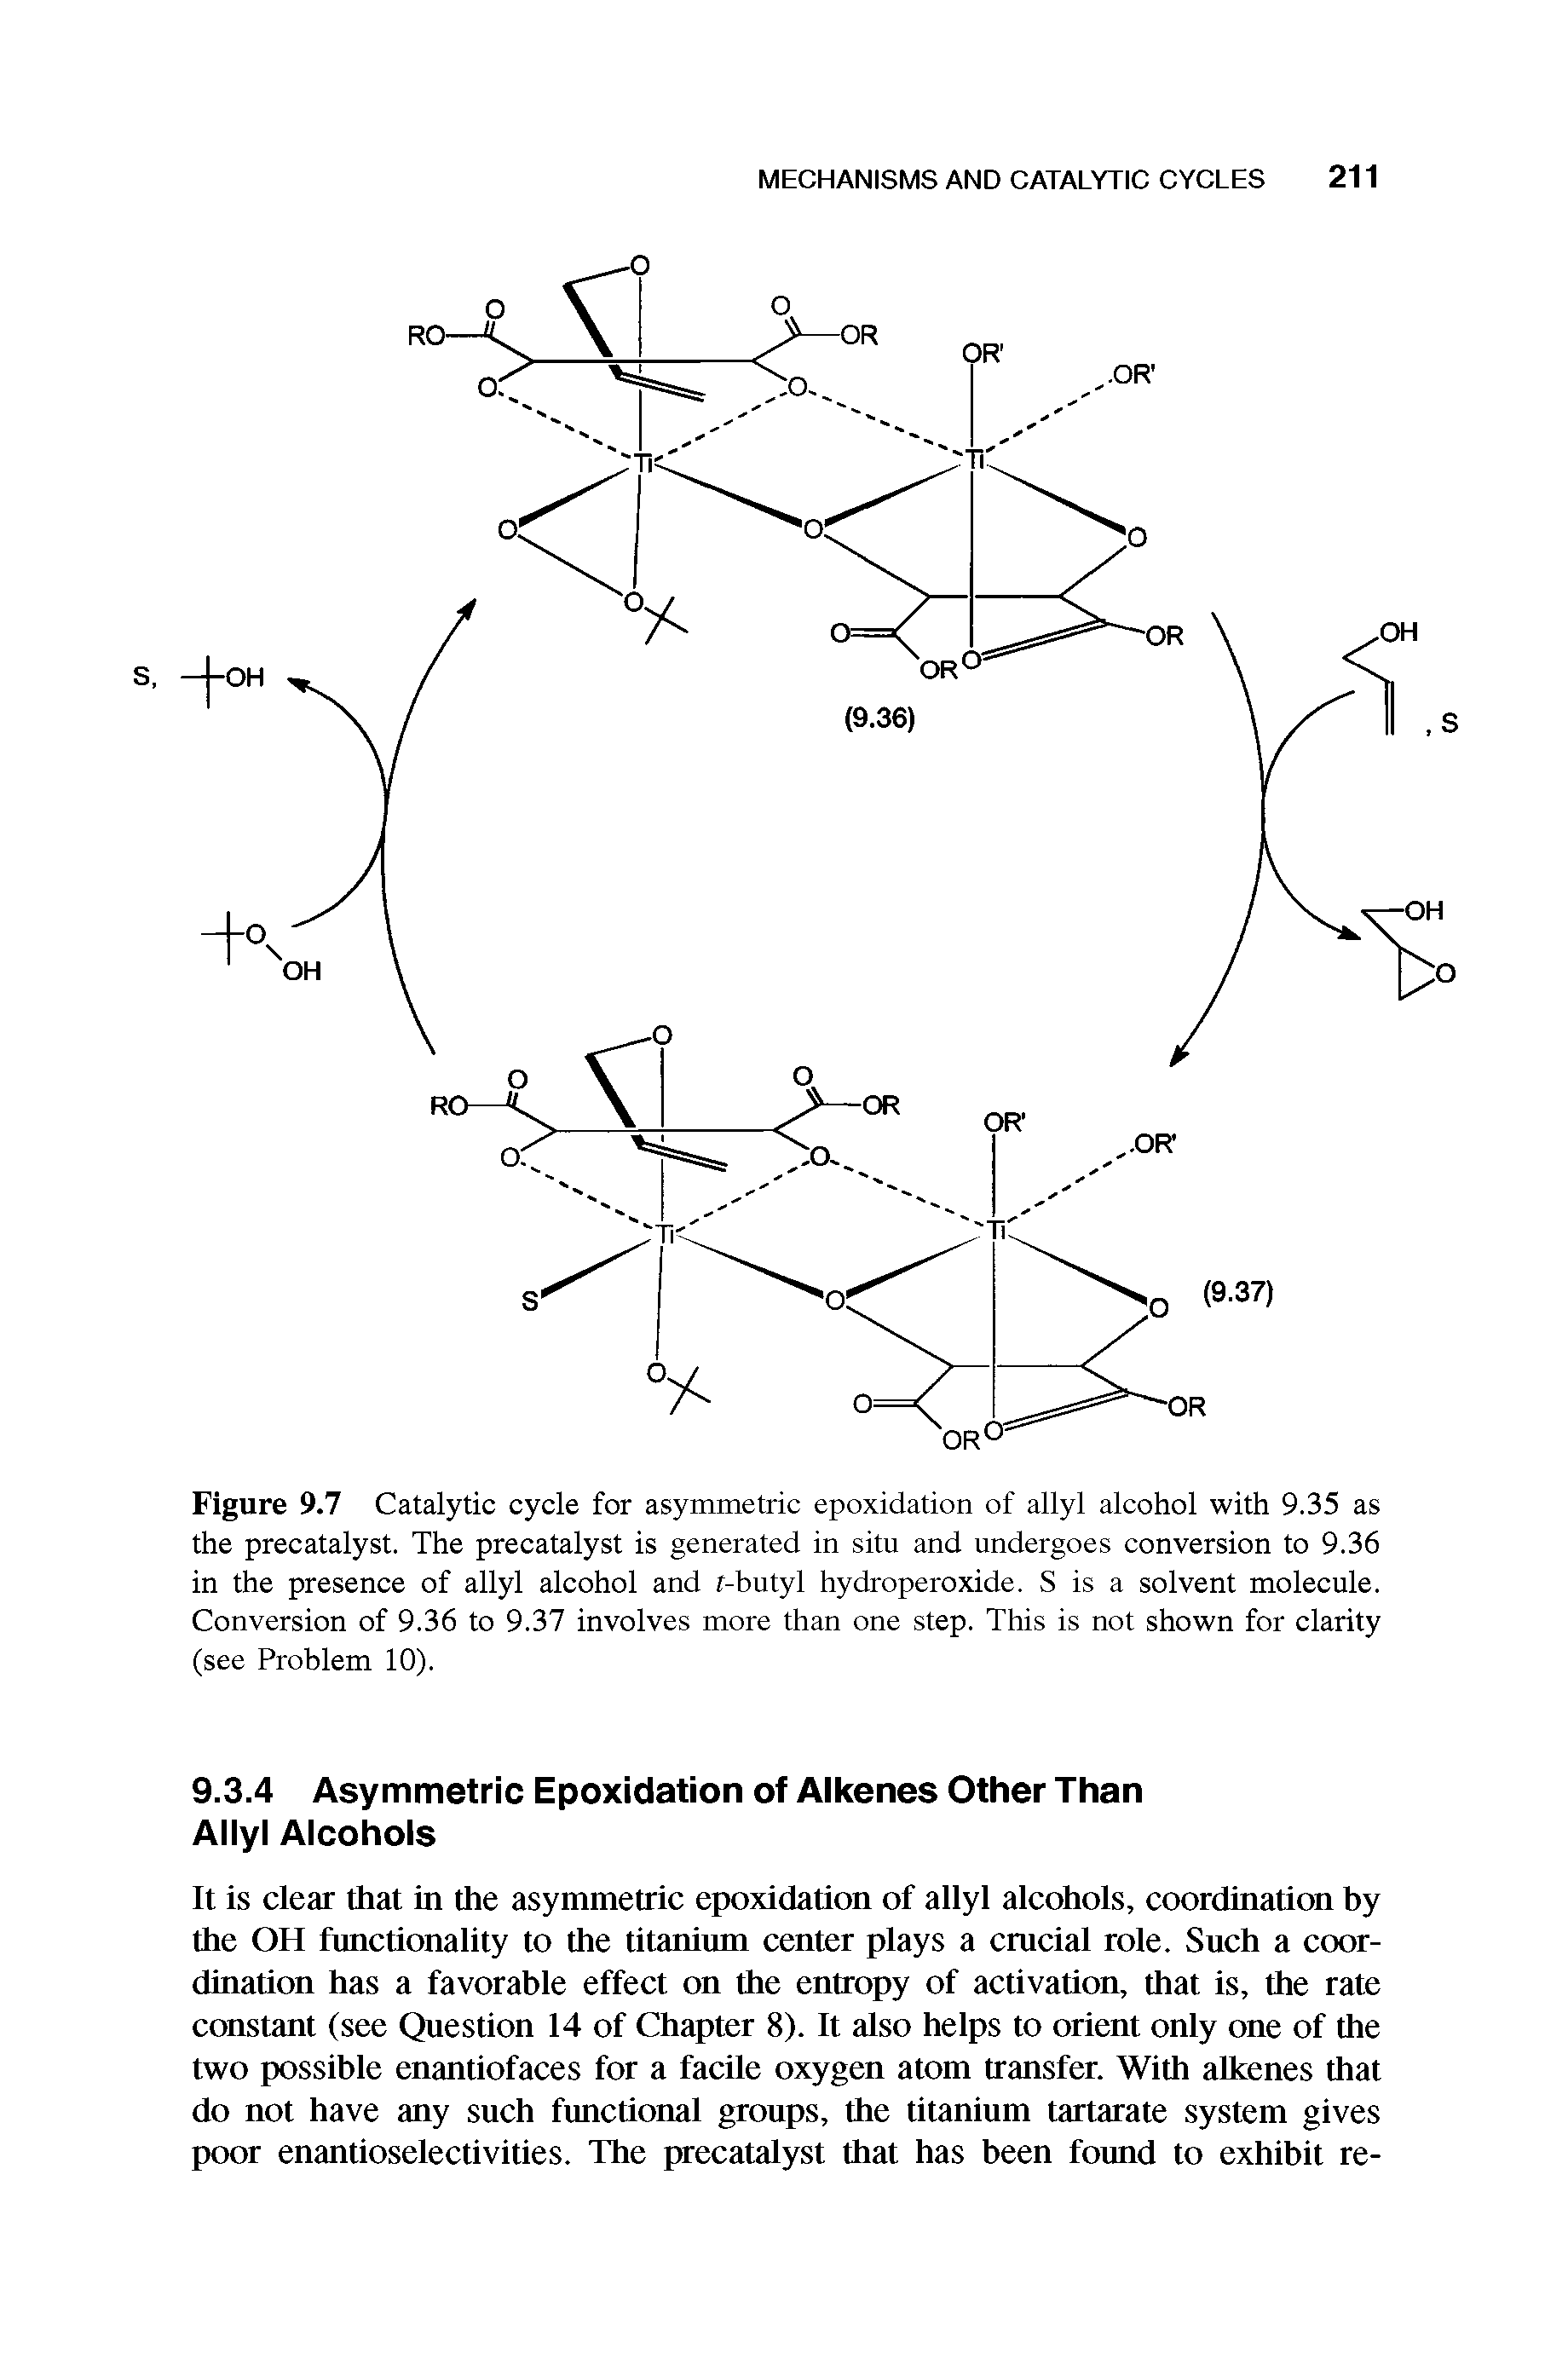 Figure 9.7 Catalytic cycle for asymmetric epoxidation of allyl alcohol with 9.35 as the precatalyst. The precatalyst is generated in situ and undergoes conversion to 9.36 in the presence of allyl alcohol and r-butyl hydroperoxide. S is a solvent molecule. Conversion of 9.36 to 9.37 involves more than one step. This is not shown for clarity (see Problem 10).